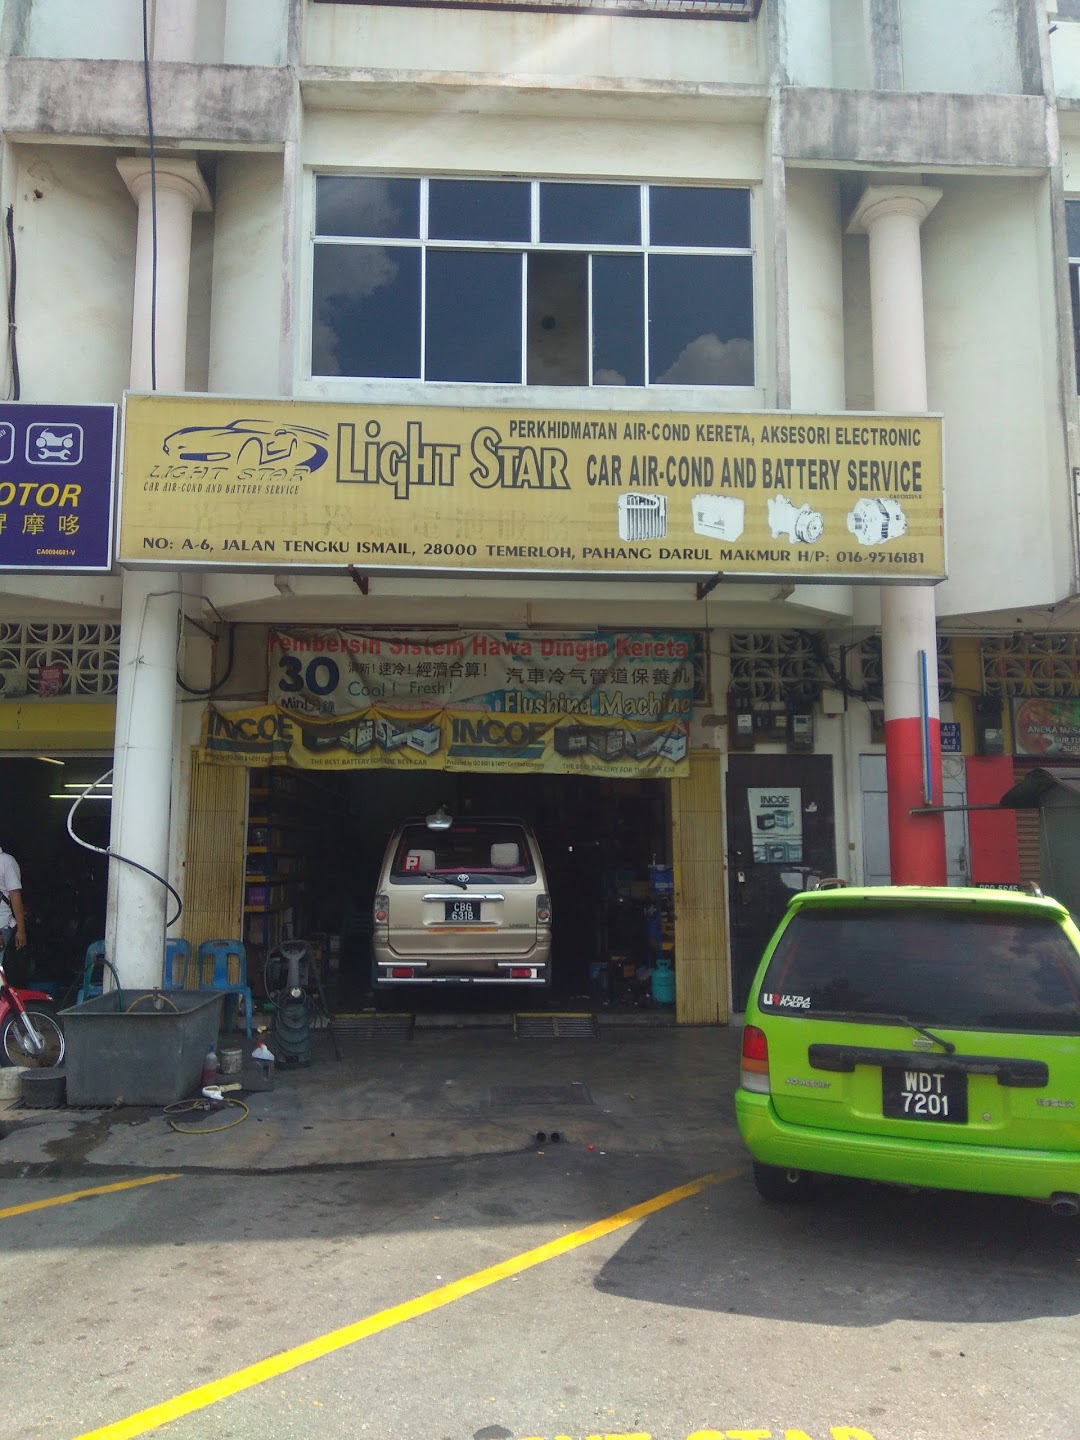 Light Star Car Air-Cond And Battery Service